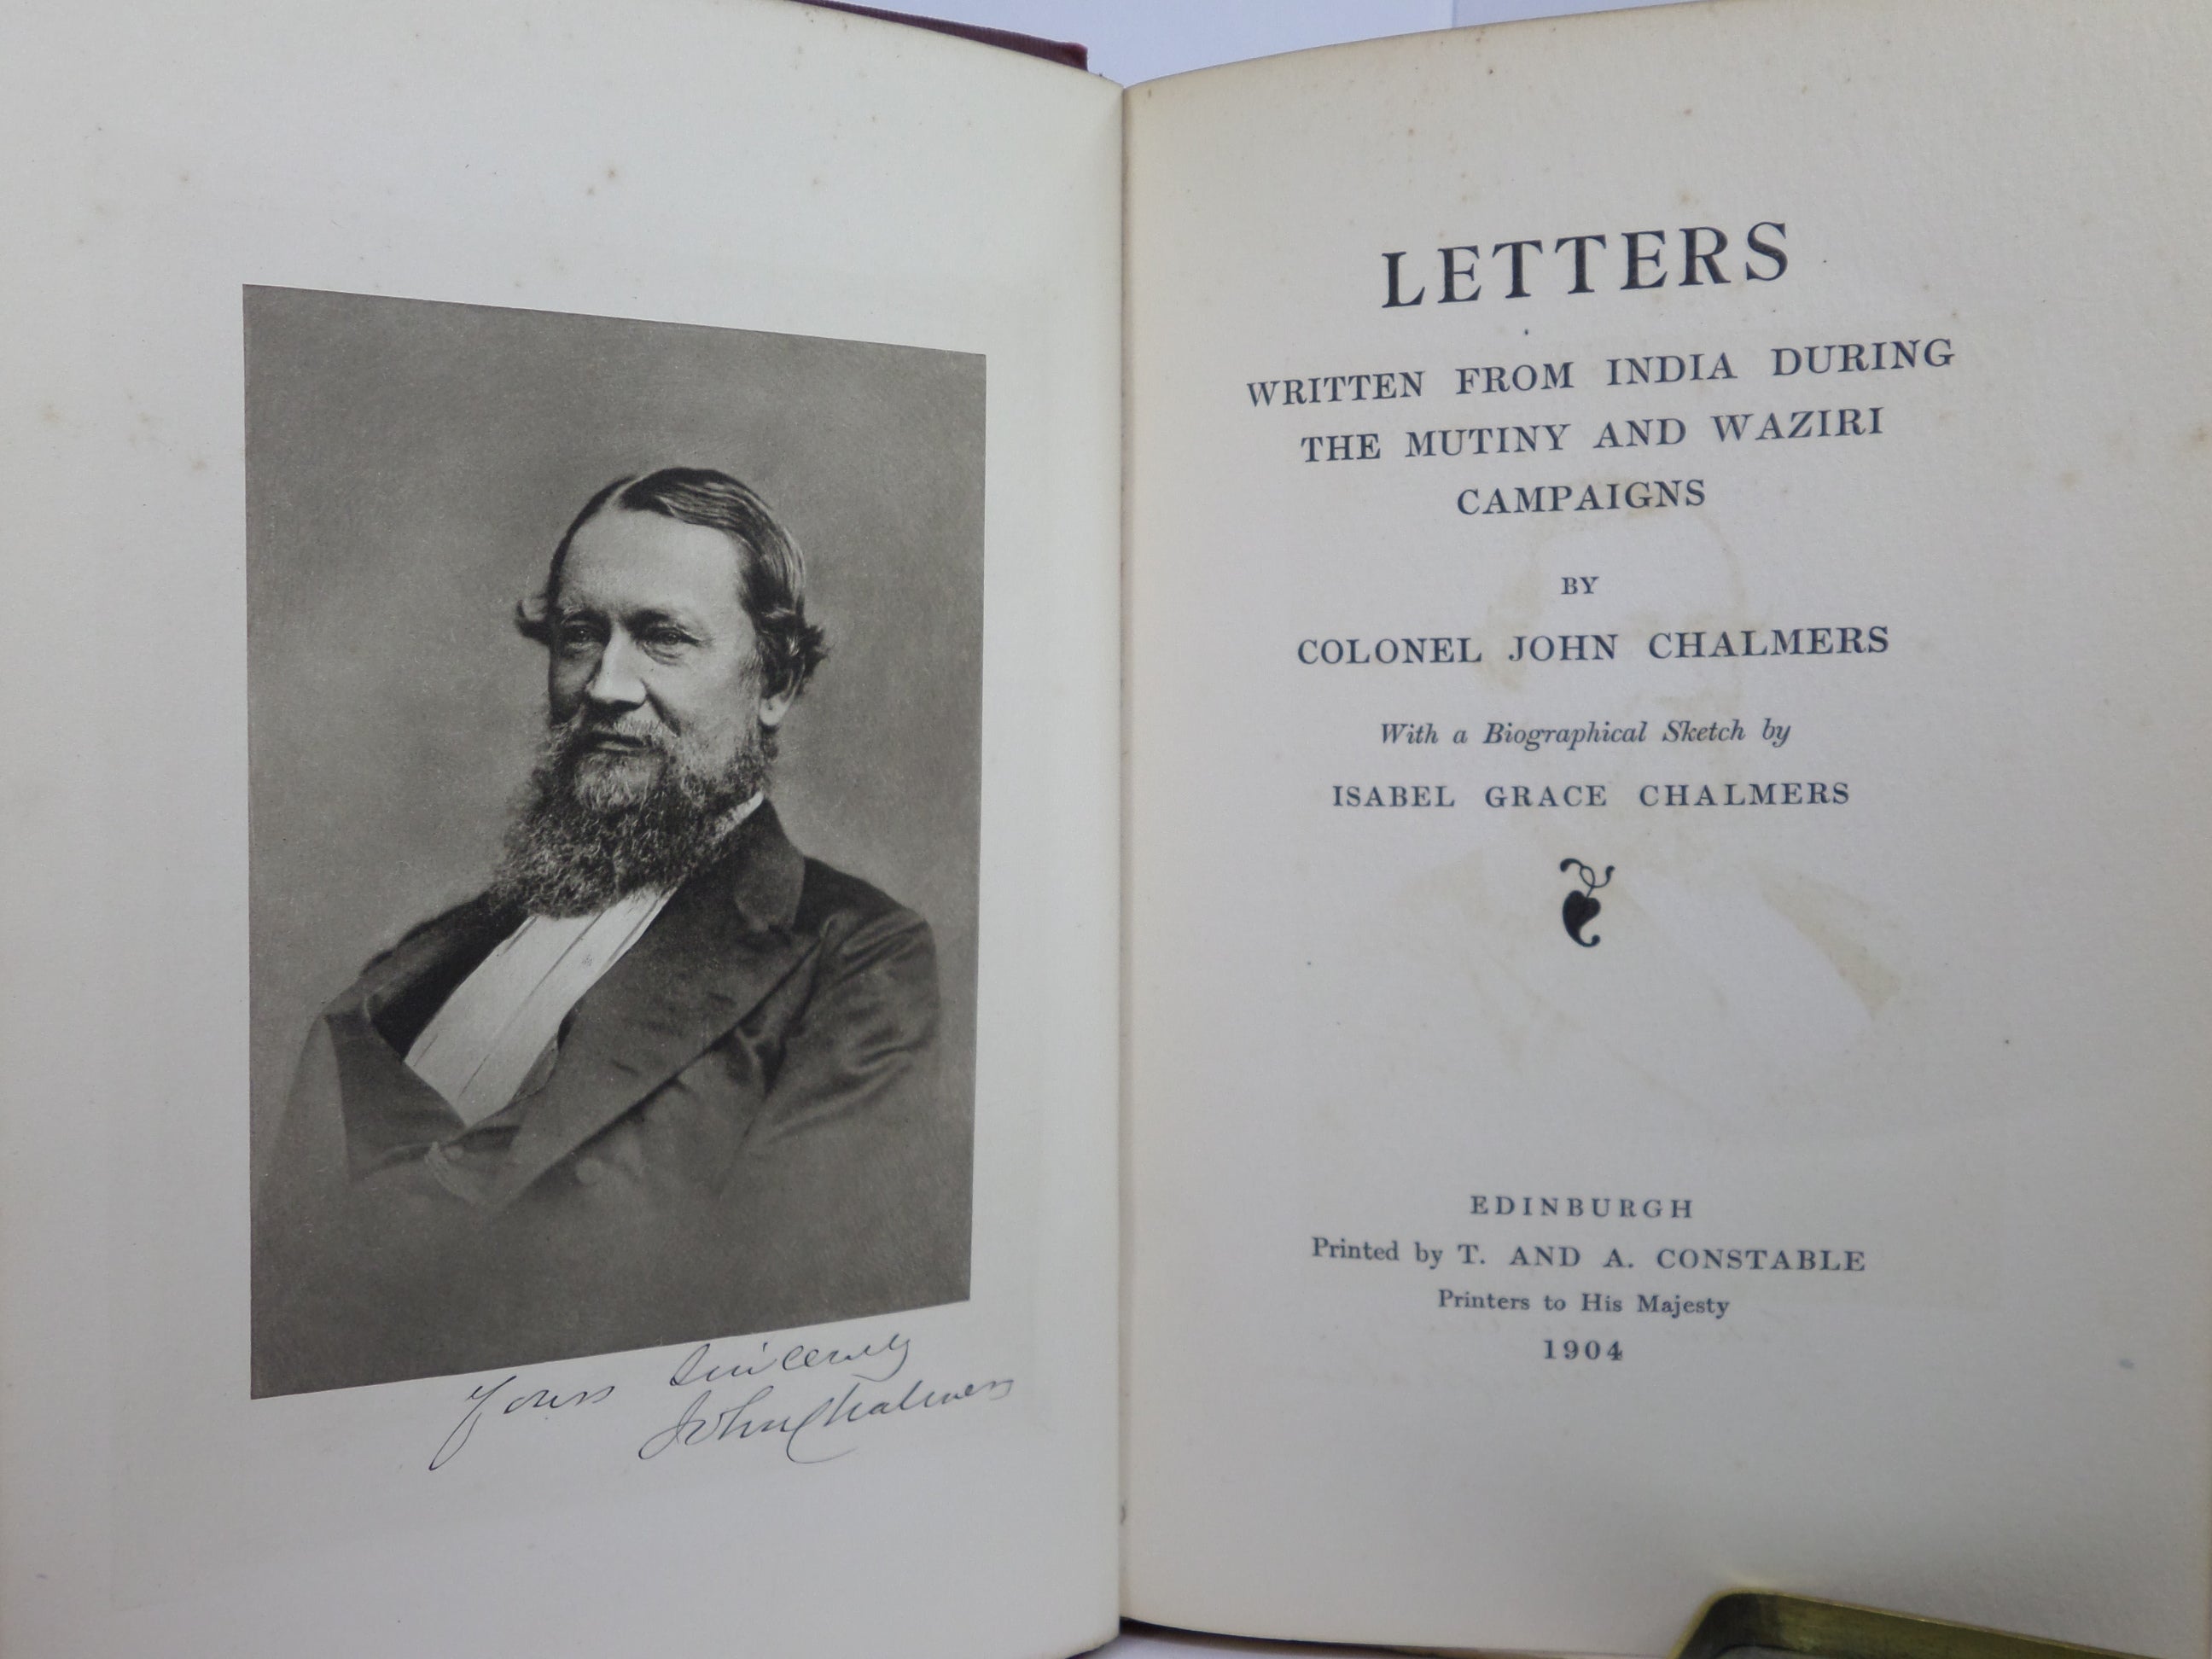 LETTERS WRITTEN FROM INDIA DURING THE MUTINY & WAZIRI CAMPAIGNS BY JOHN CHALMERS